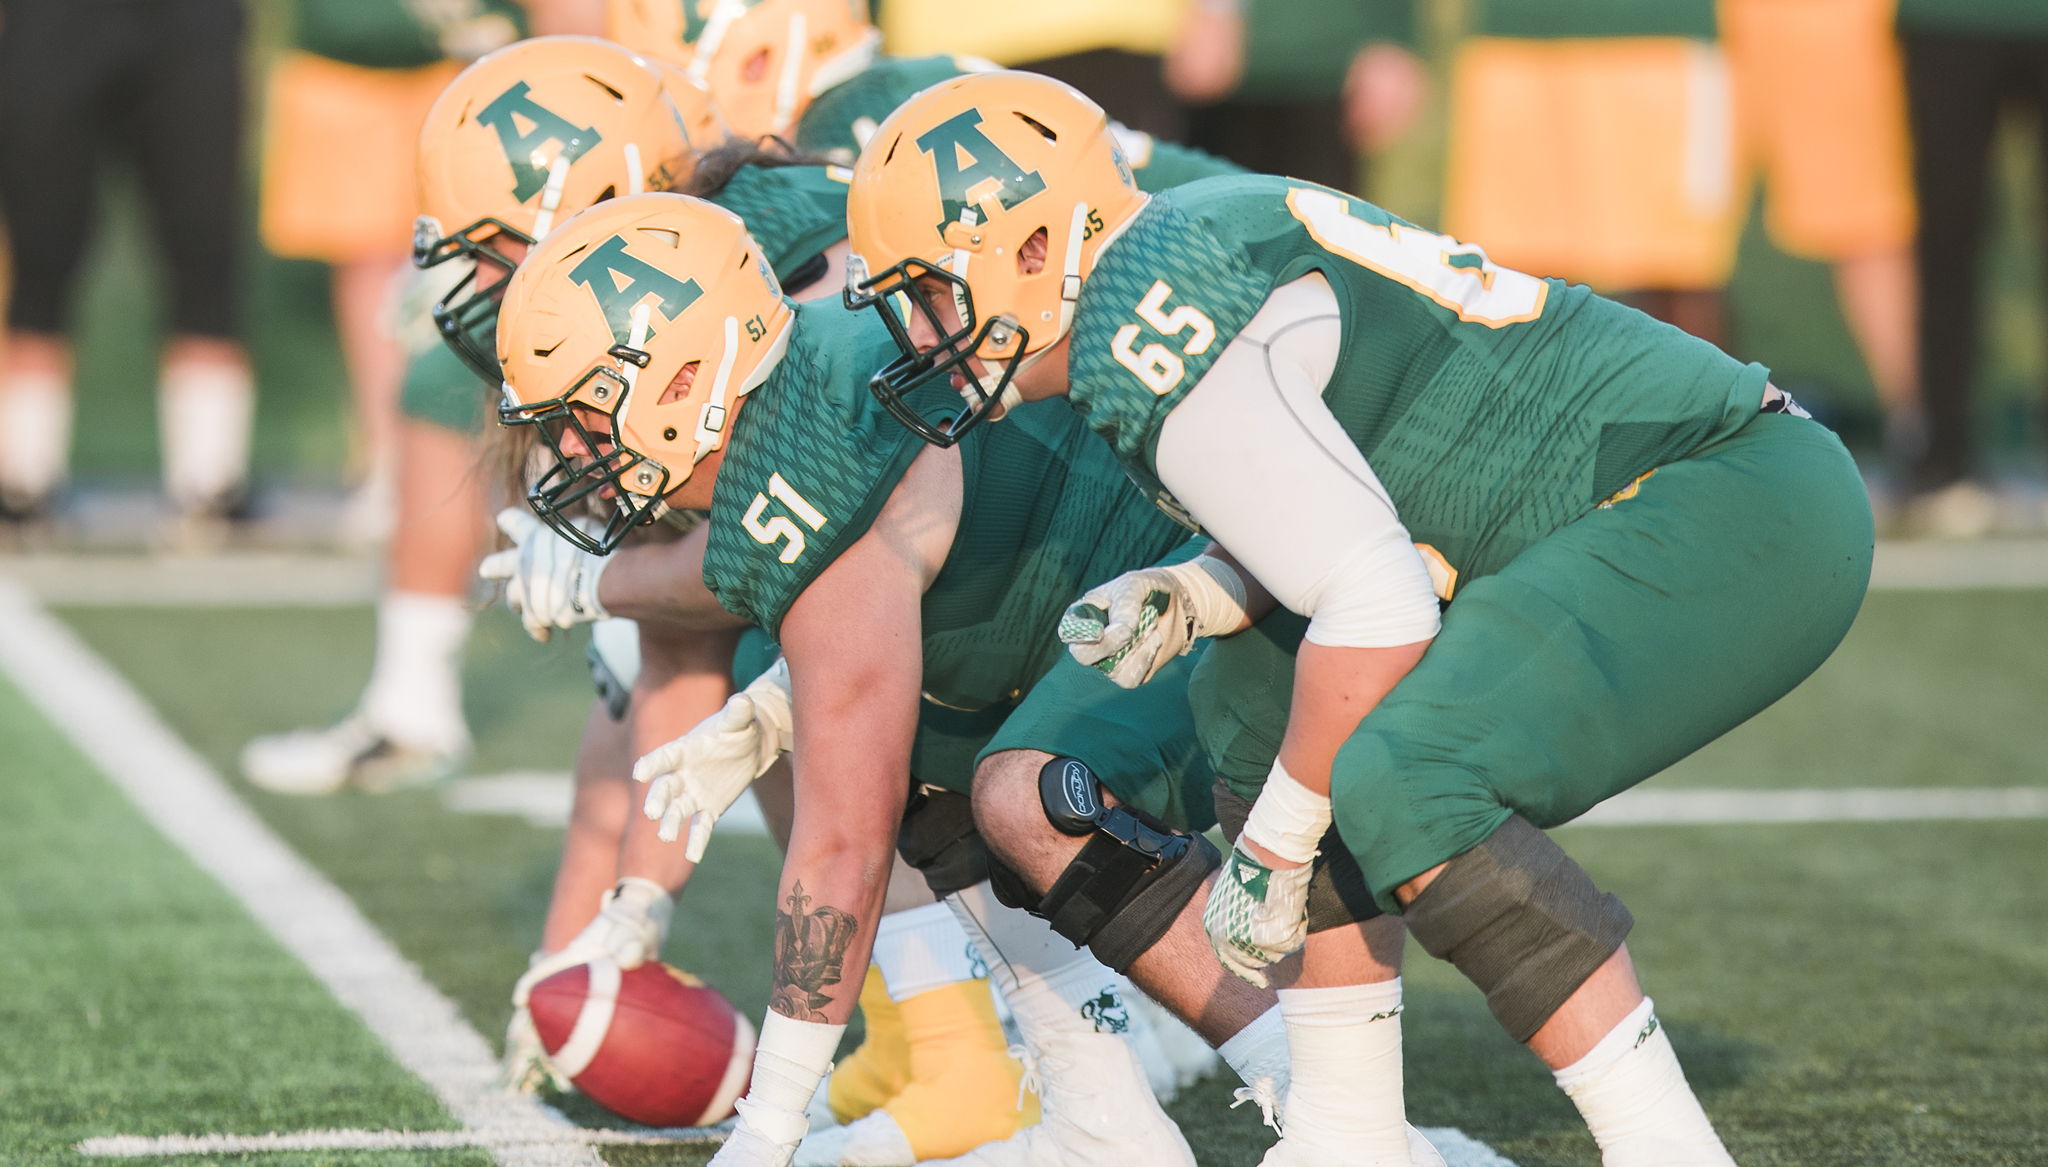 Korte was a coveted free agent on the offensive line, as the versatile Spruce Grove native returns to Edmonton after excelling at the University of Alberta from 2014-17. Photo credit: Bears and Pandas Athletics.